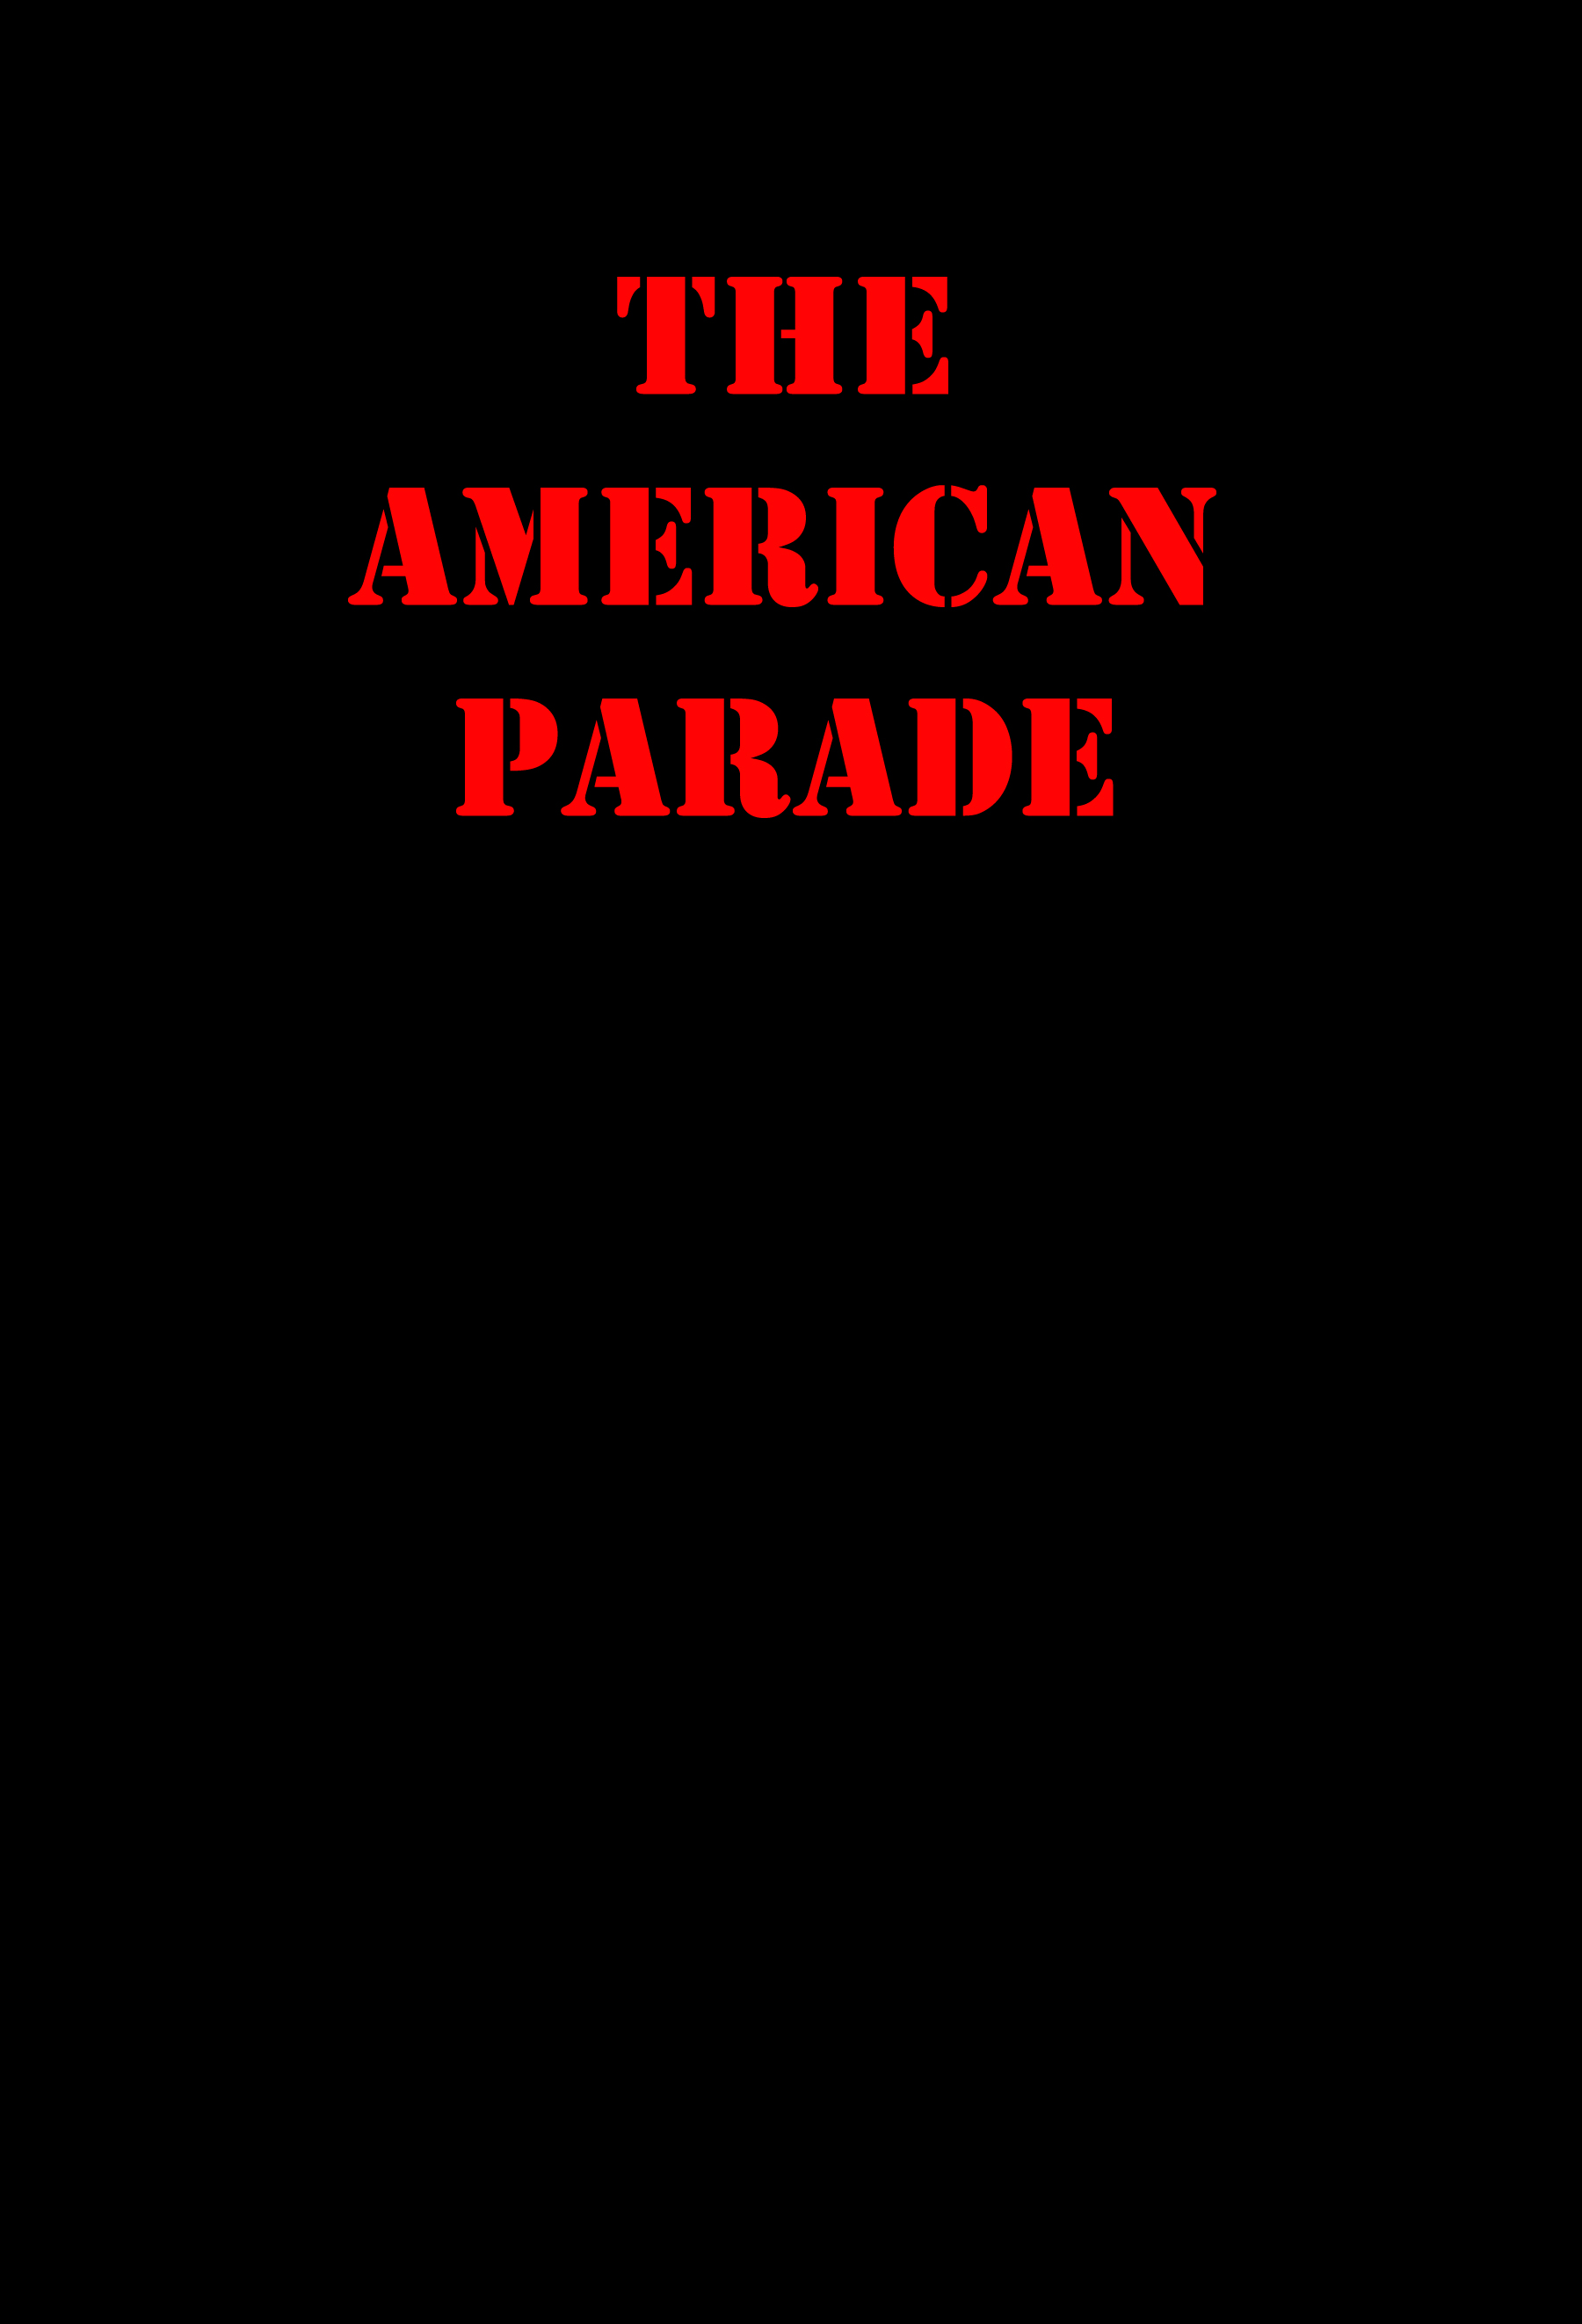 The American Parade